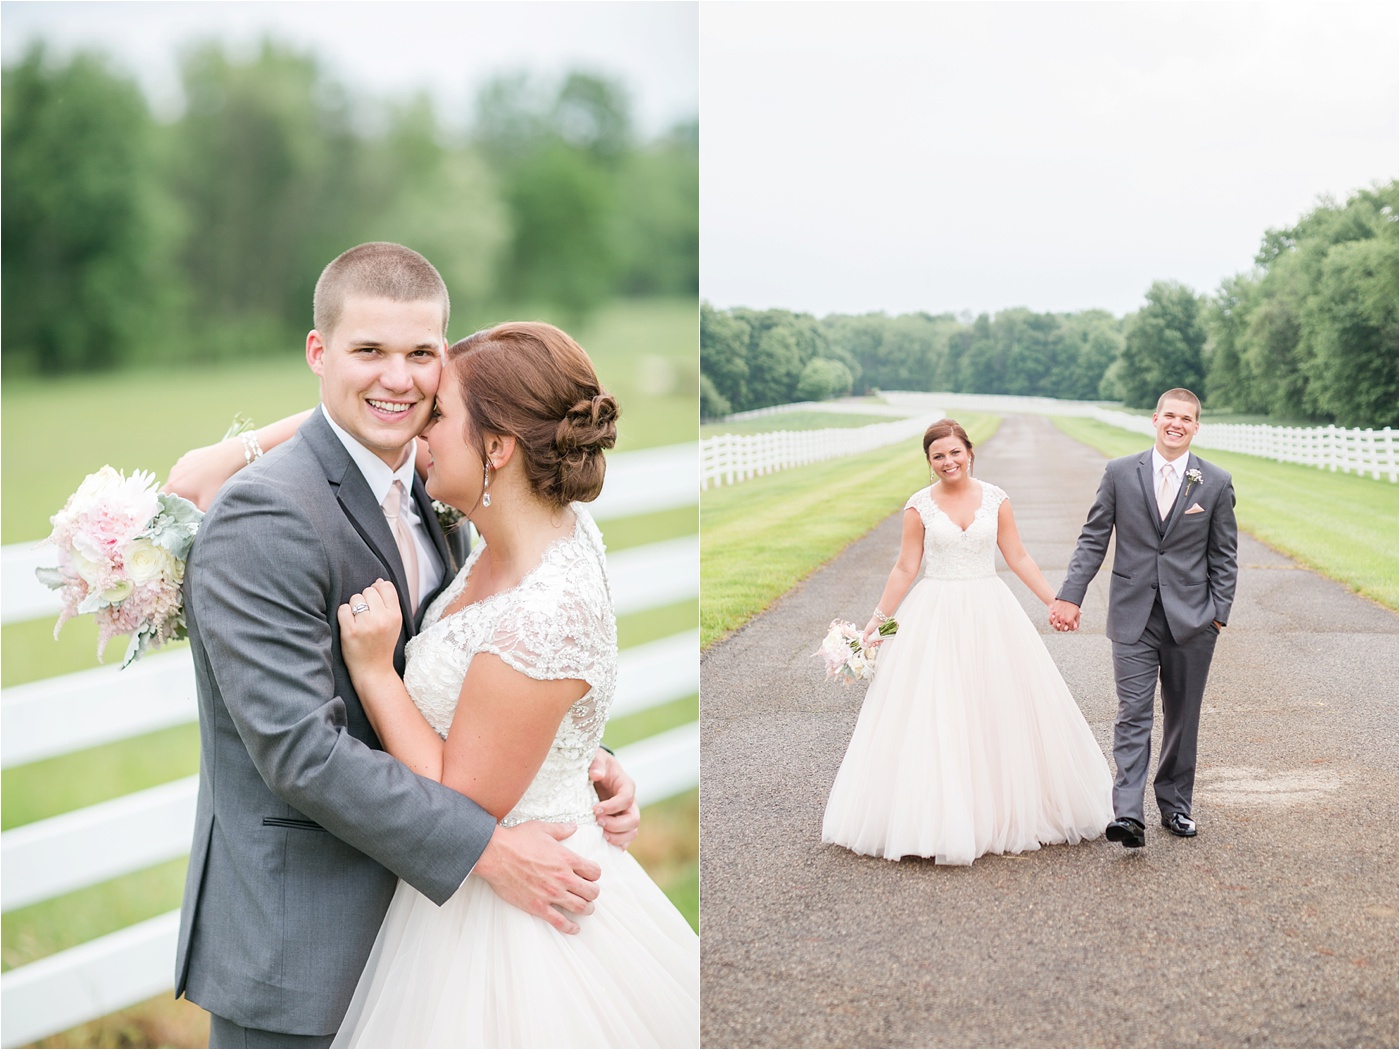 A Blush Outdoor wedding at Irongate Equestrian | KariMe Photography_0146